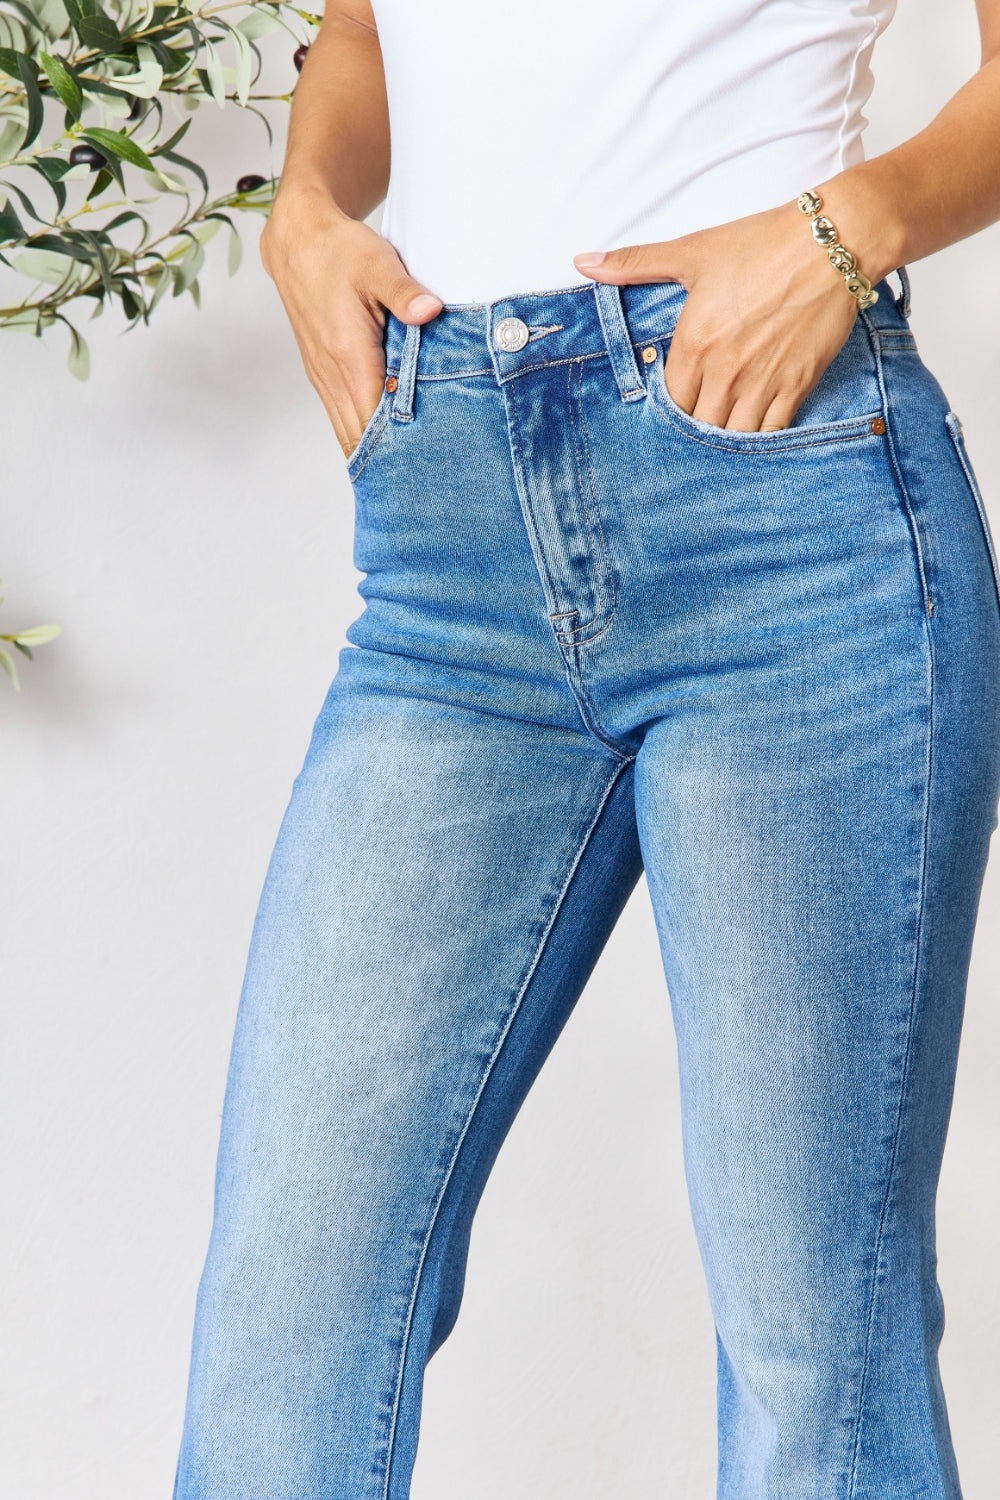 BAYEAS Front Slits Detail Zipper Fly Flare Jeans